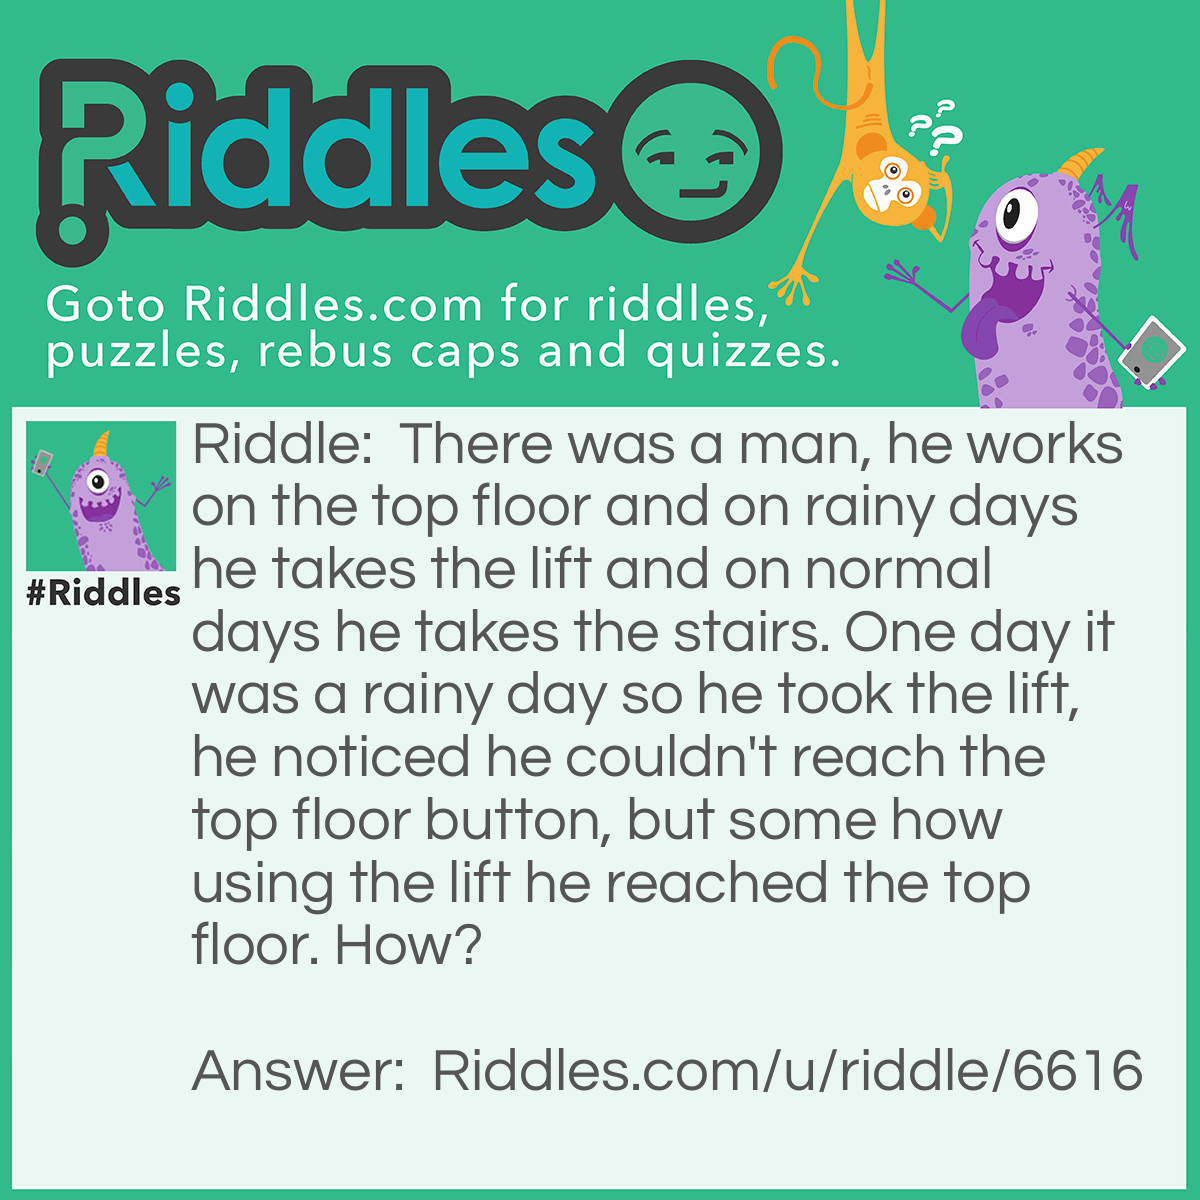 Riddle: There was a man, he works on the top floor and on rainy days he takes the lift and on normal days he takes the stairs. One day it was a rainy day so he took the lift, he noticed he couldn't reach the top floor button, but some how using the lift he reached the top floor. How? Answer: He used his umbrella because it was a rainy day.